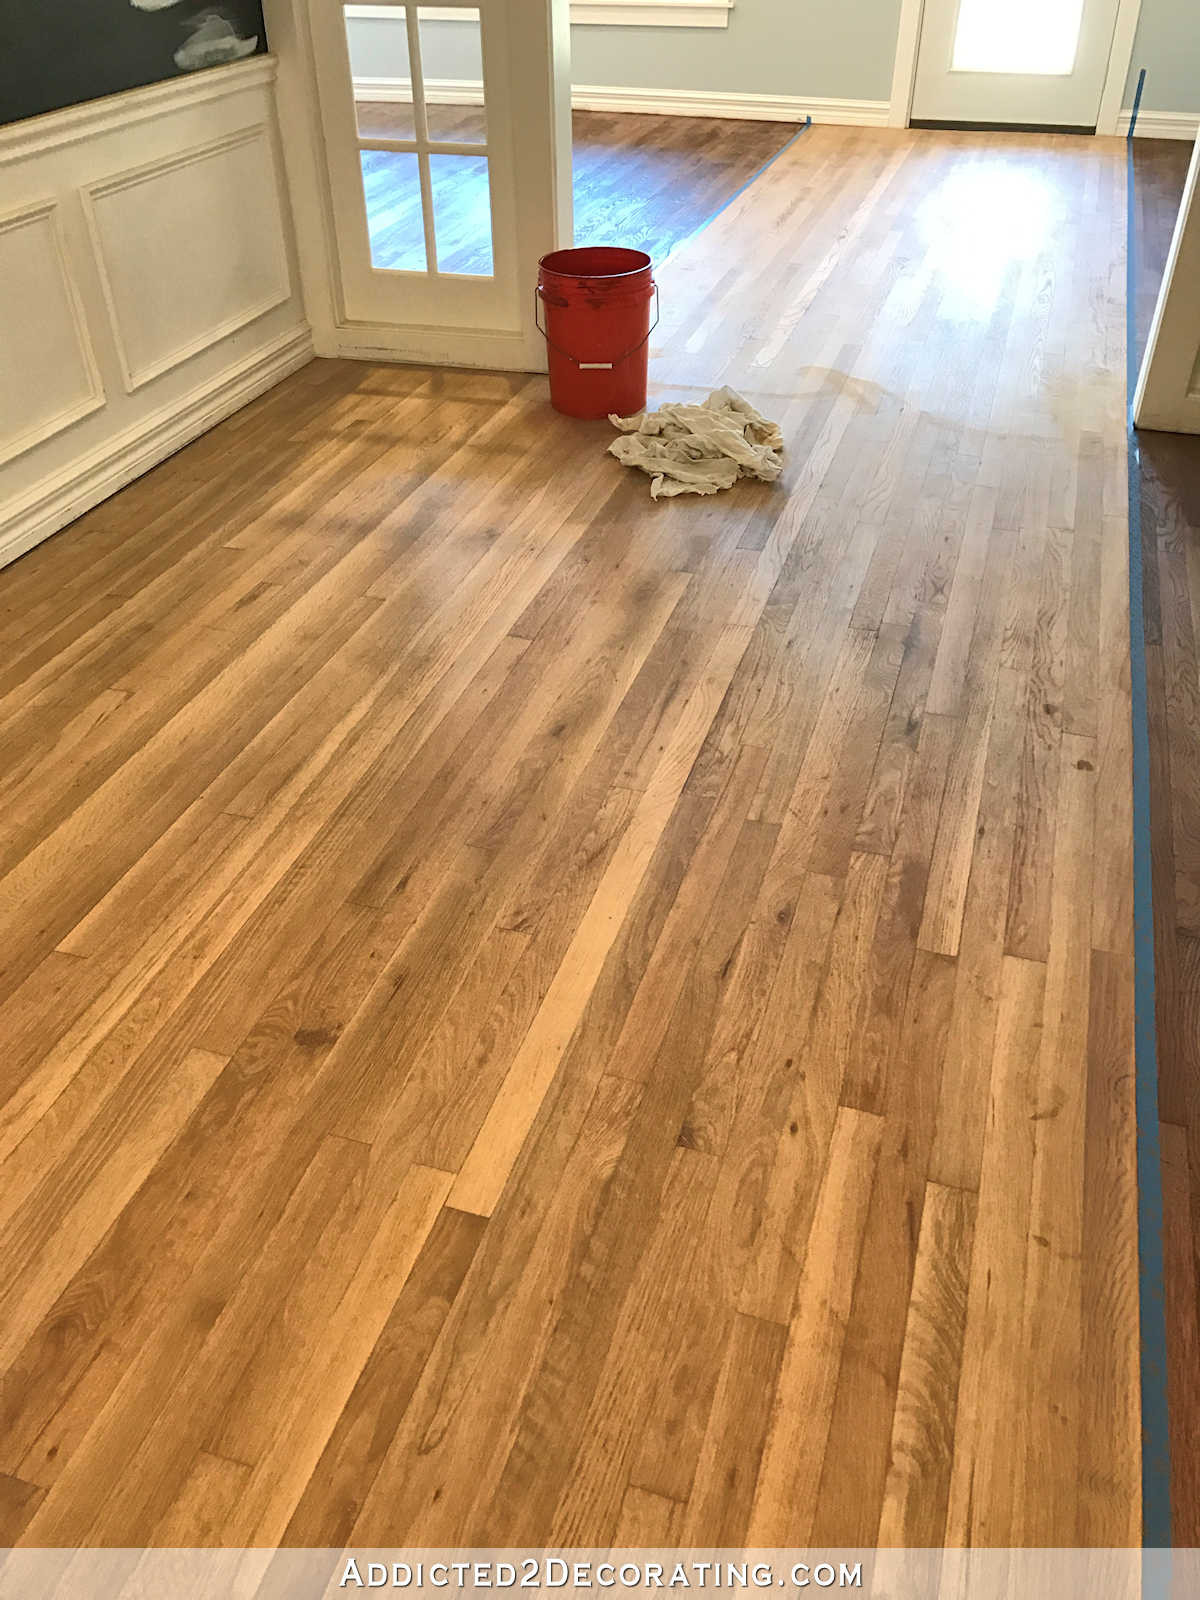 25 Nice How Much Does Restaining Hardwood Floors Cost 2022 free download how much does restaining hardwood floors cost of adventures in staining my red oak hardwood floors products process with staining red oak hardwood floors 8 entryway and music room wood condi